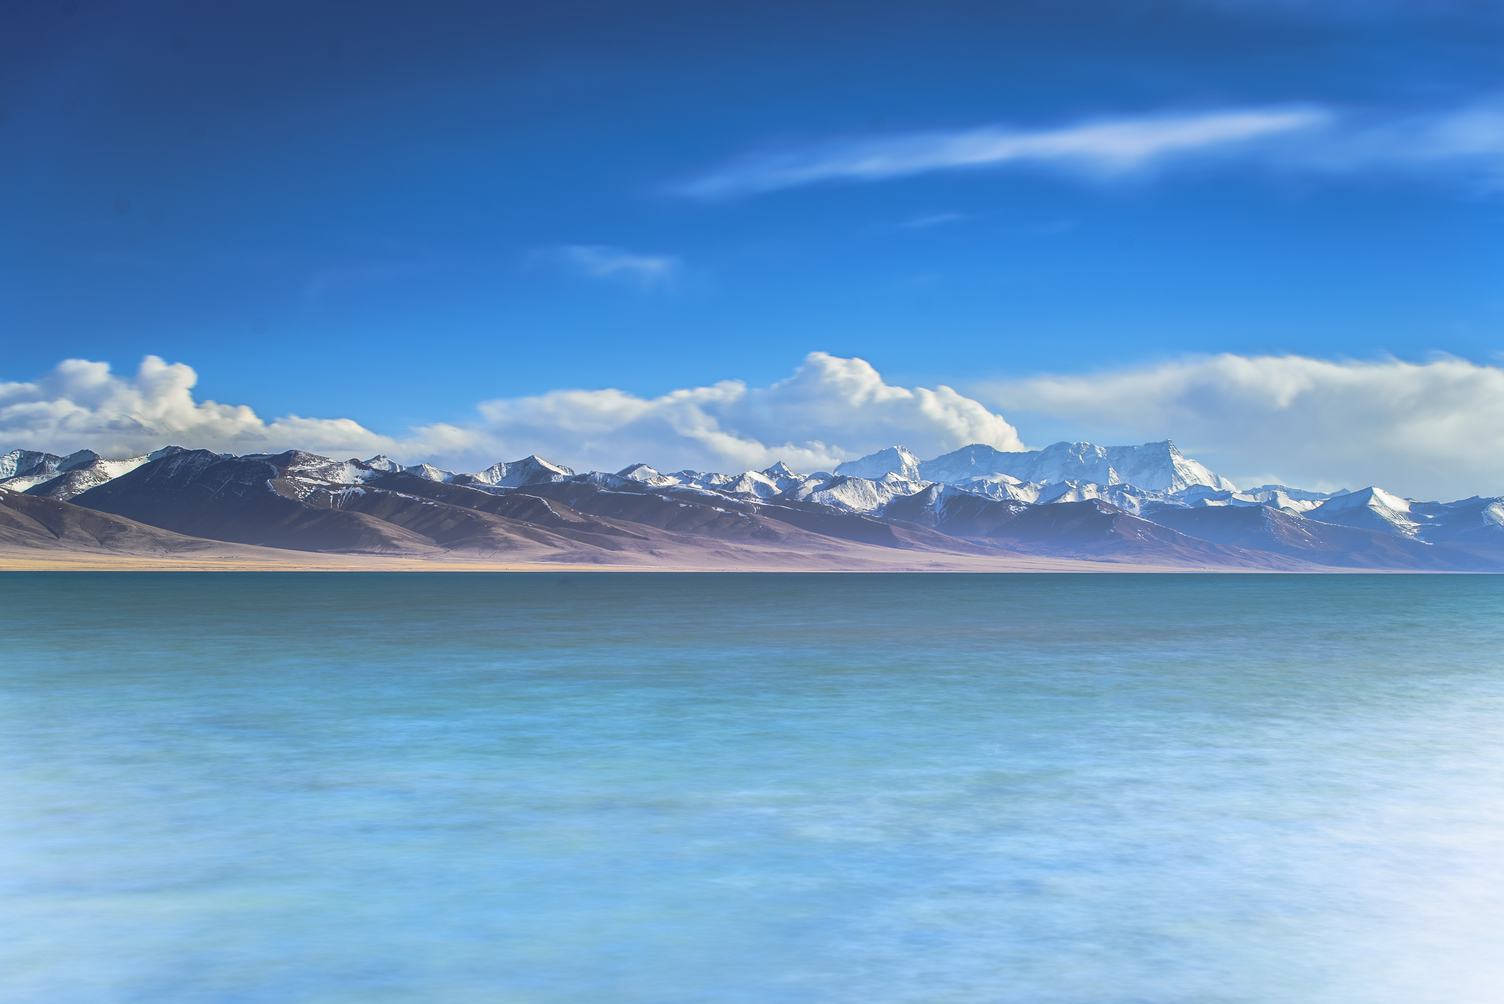 Panoramic View of the  Sea and Mountain Range